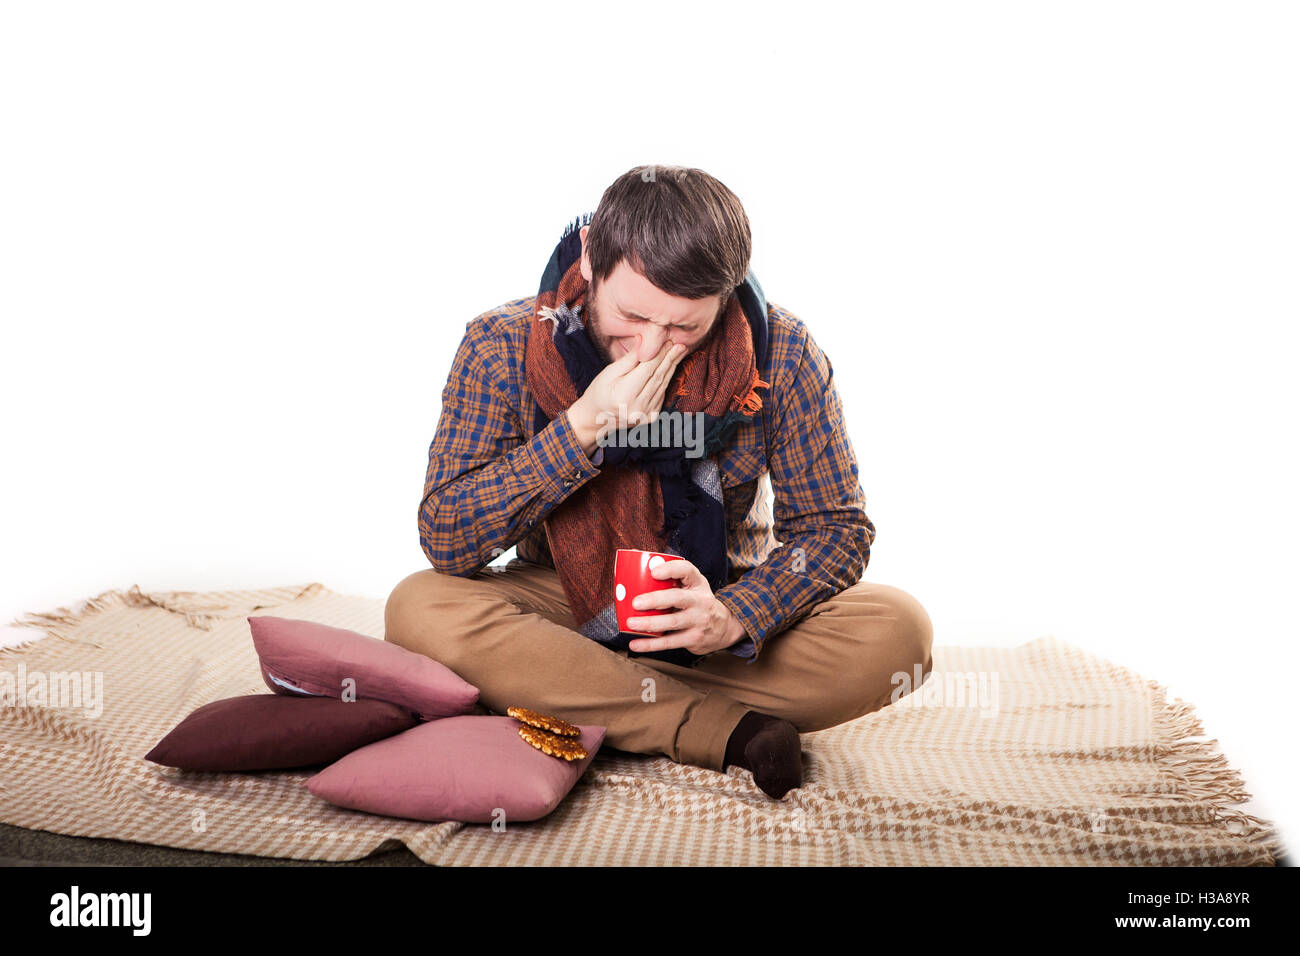 healthcare and medicine concept - ill man with flu at home Stock Photo